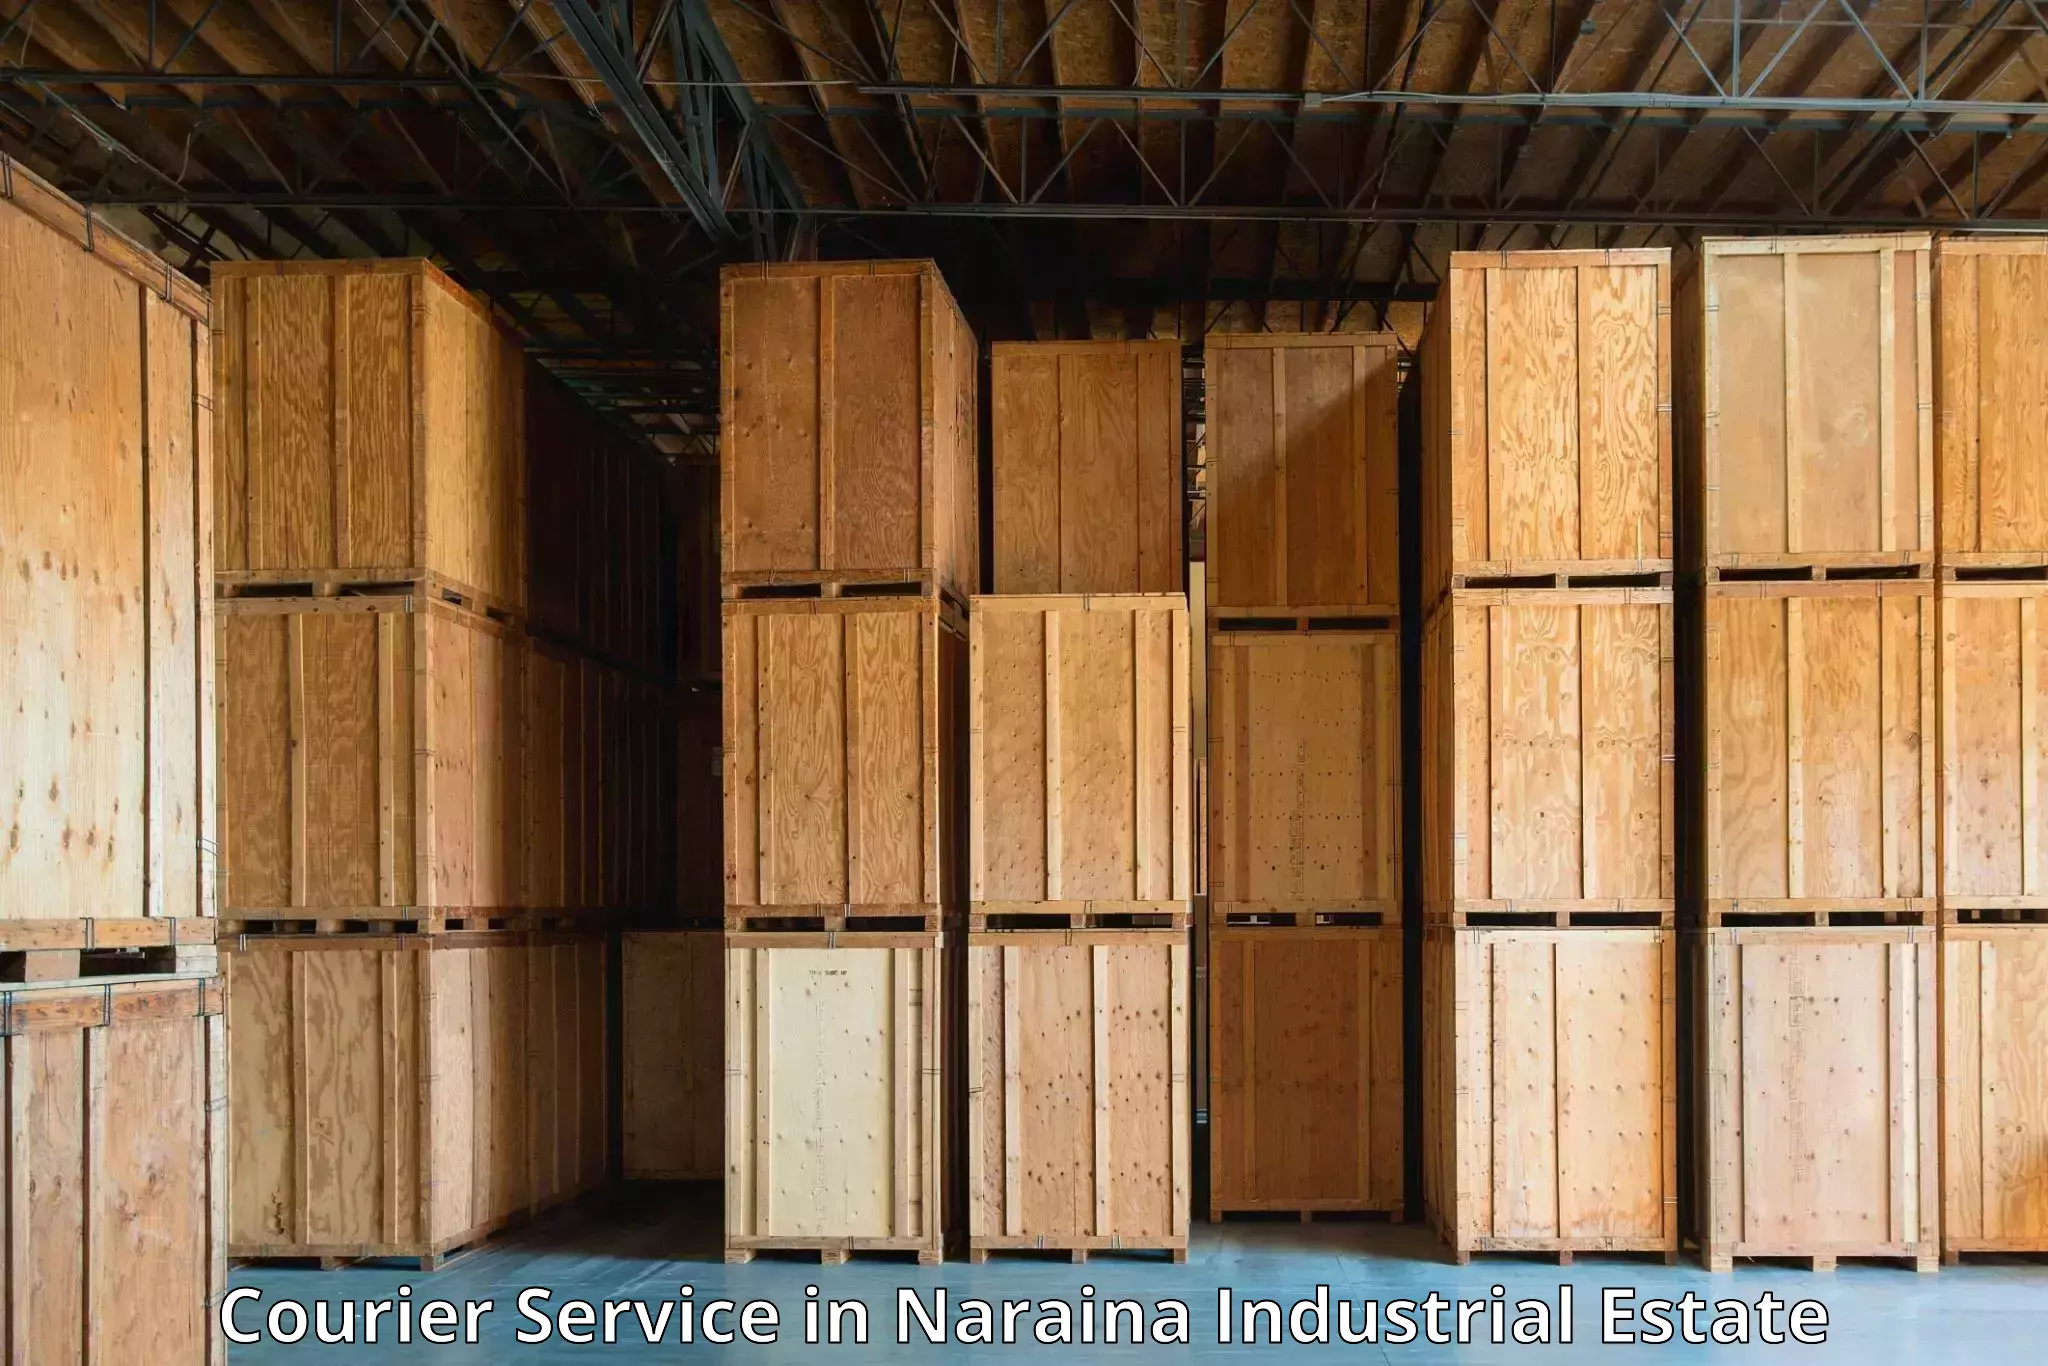 Efficient shipping operations in Naraina Industrial Estate